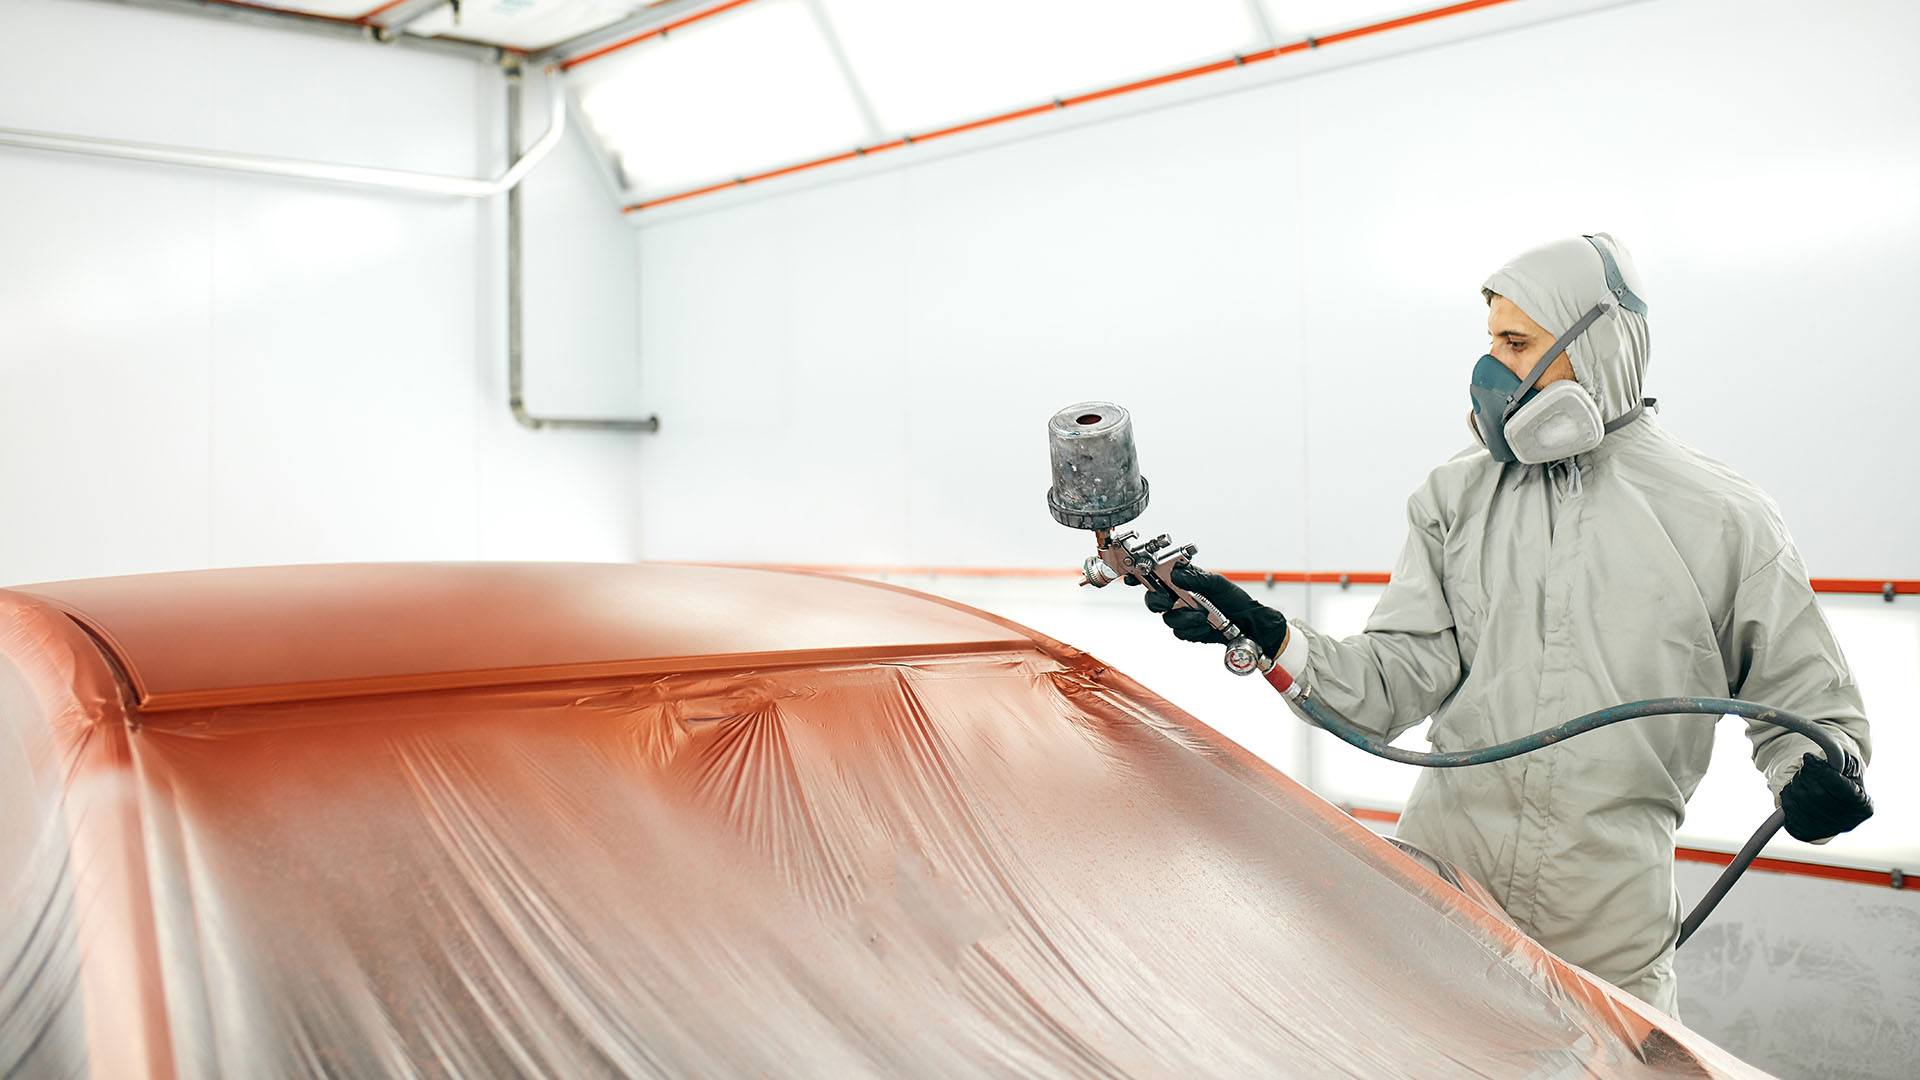 Man with protective clothes and mask painting car roof using compressor.